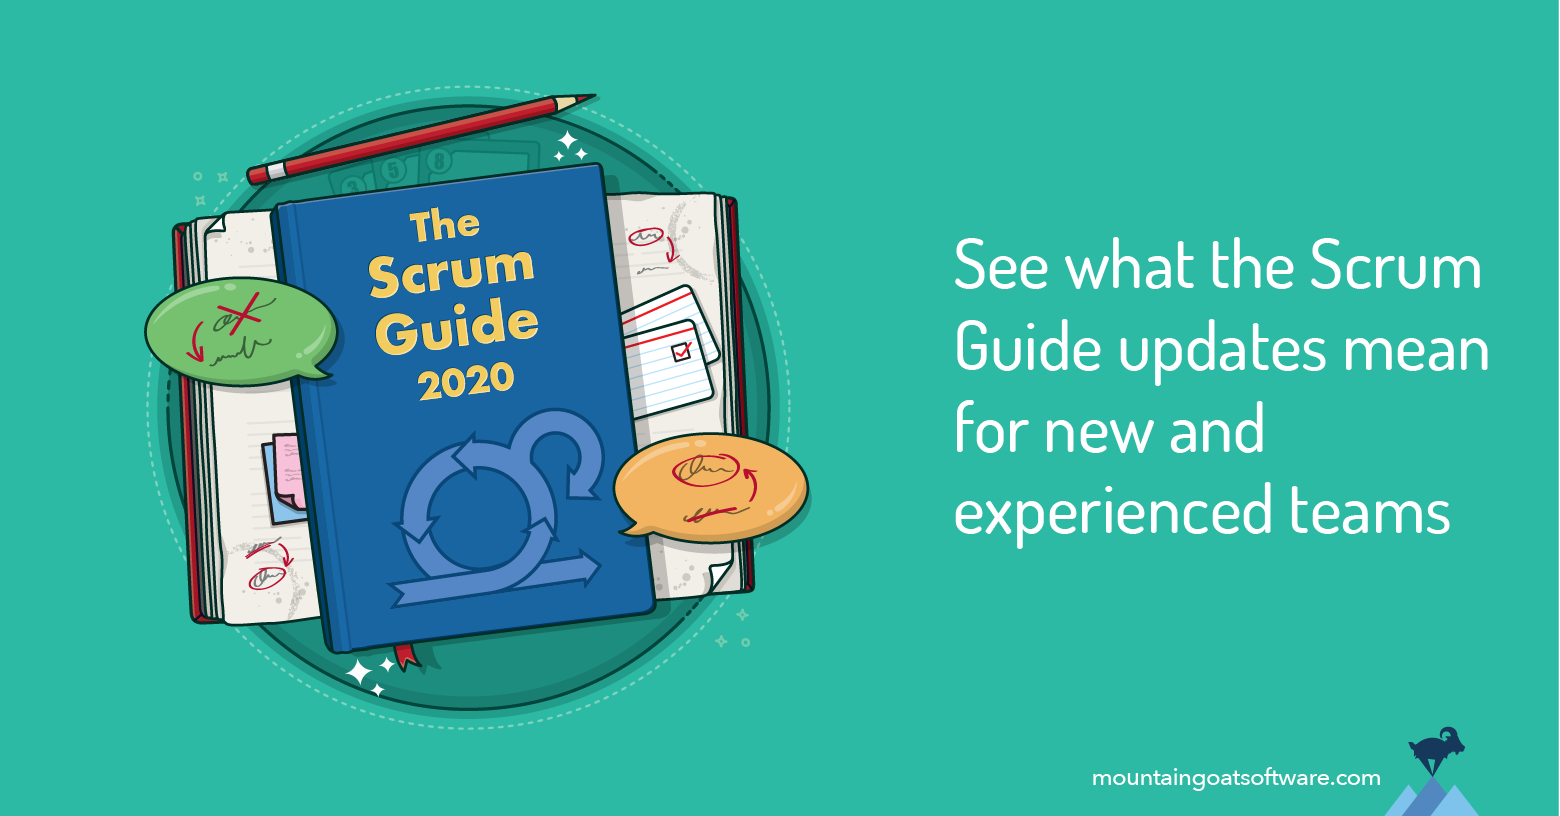 Top 5 changes in the 2020 version of the Scrum Guide